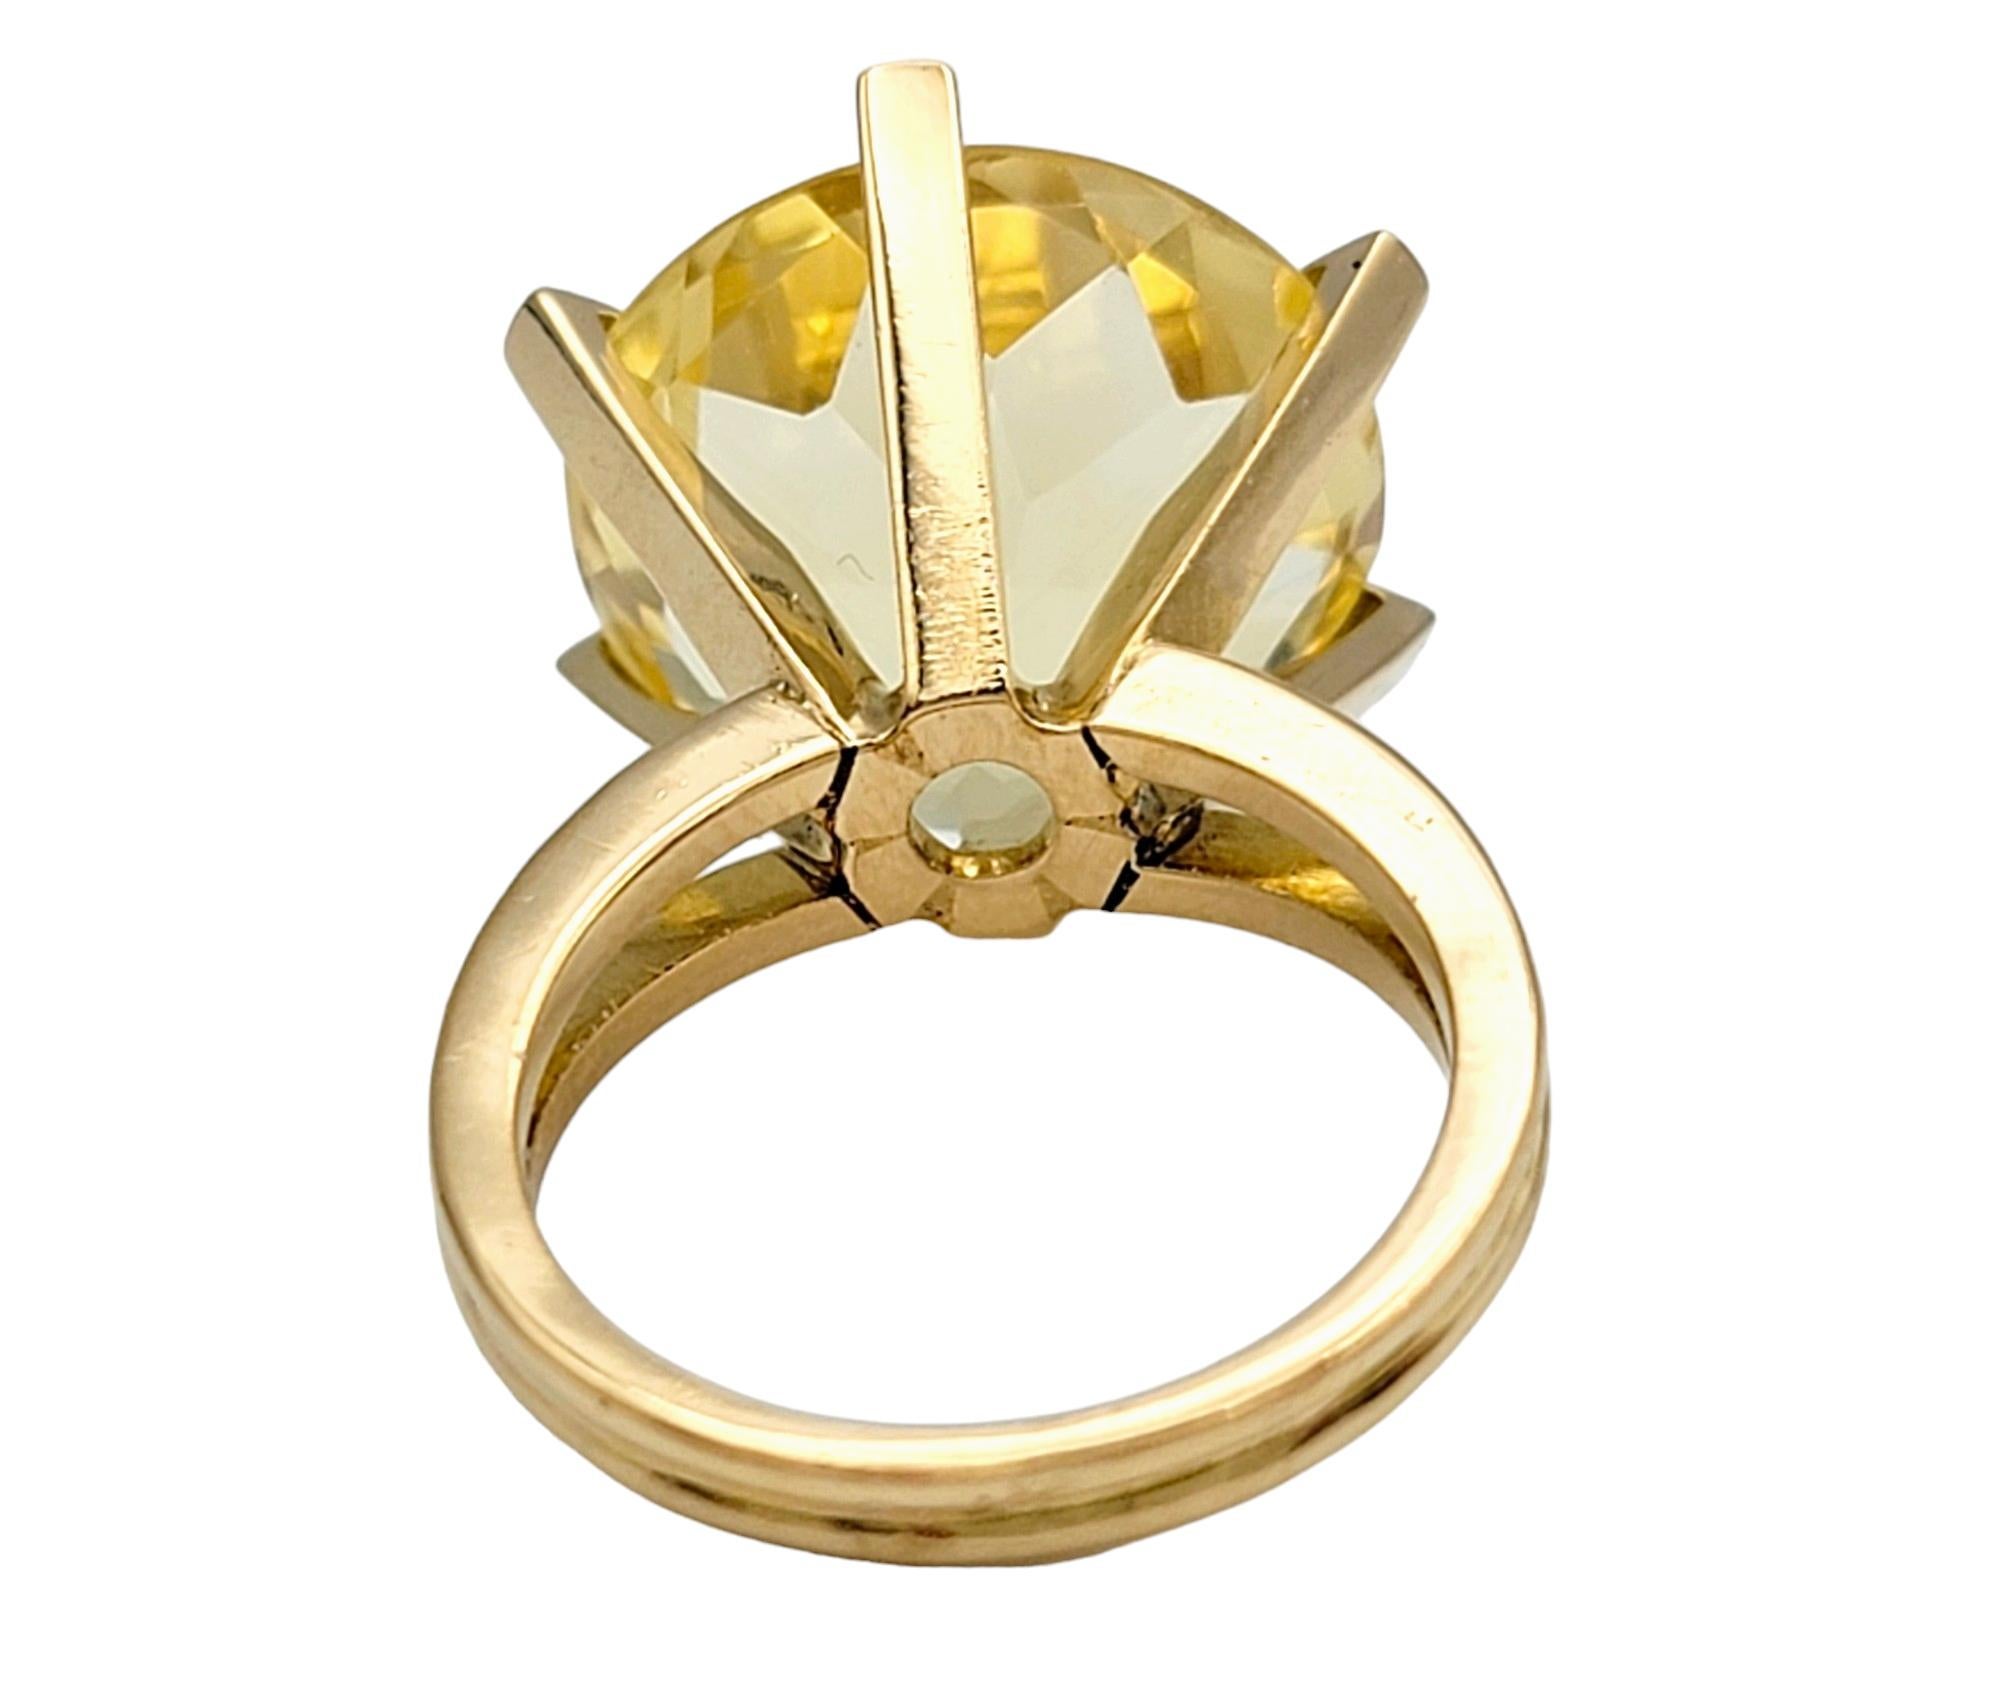 11.8 Carat Solitaire Citrine High Profile Cocktail Ring in 14 Karat Yellow Gold For Sale 2